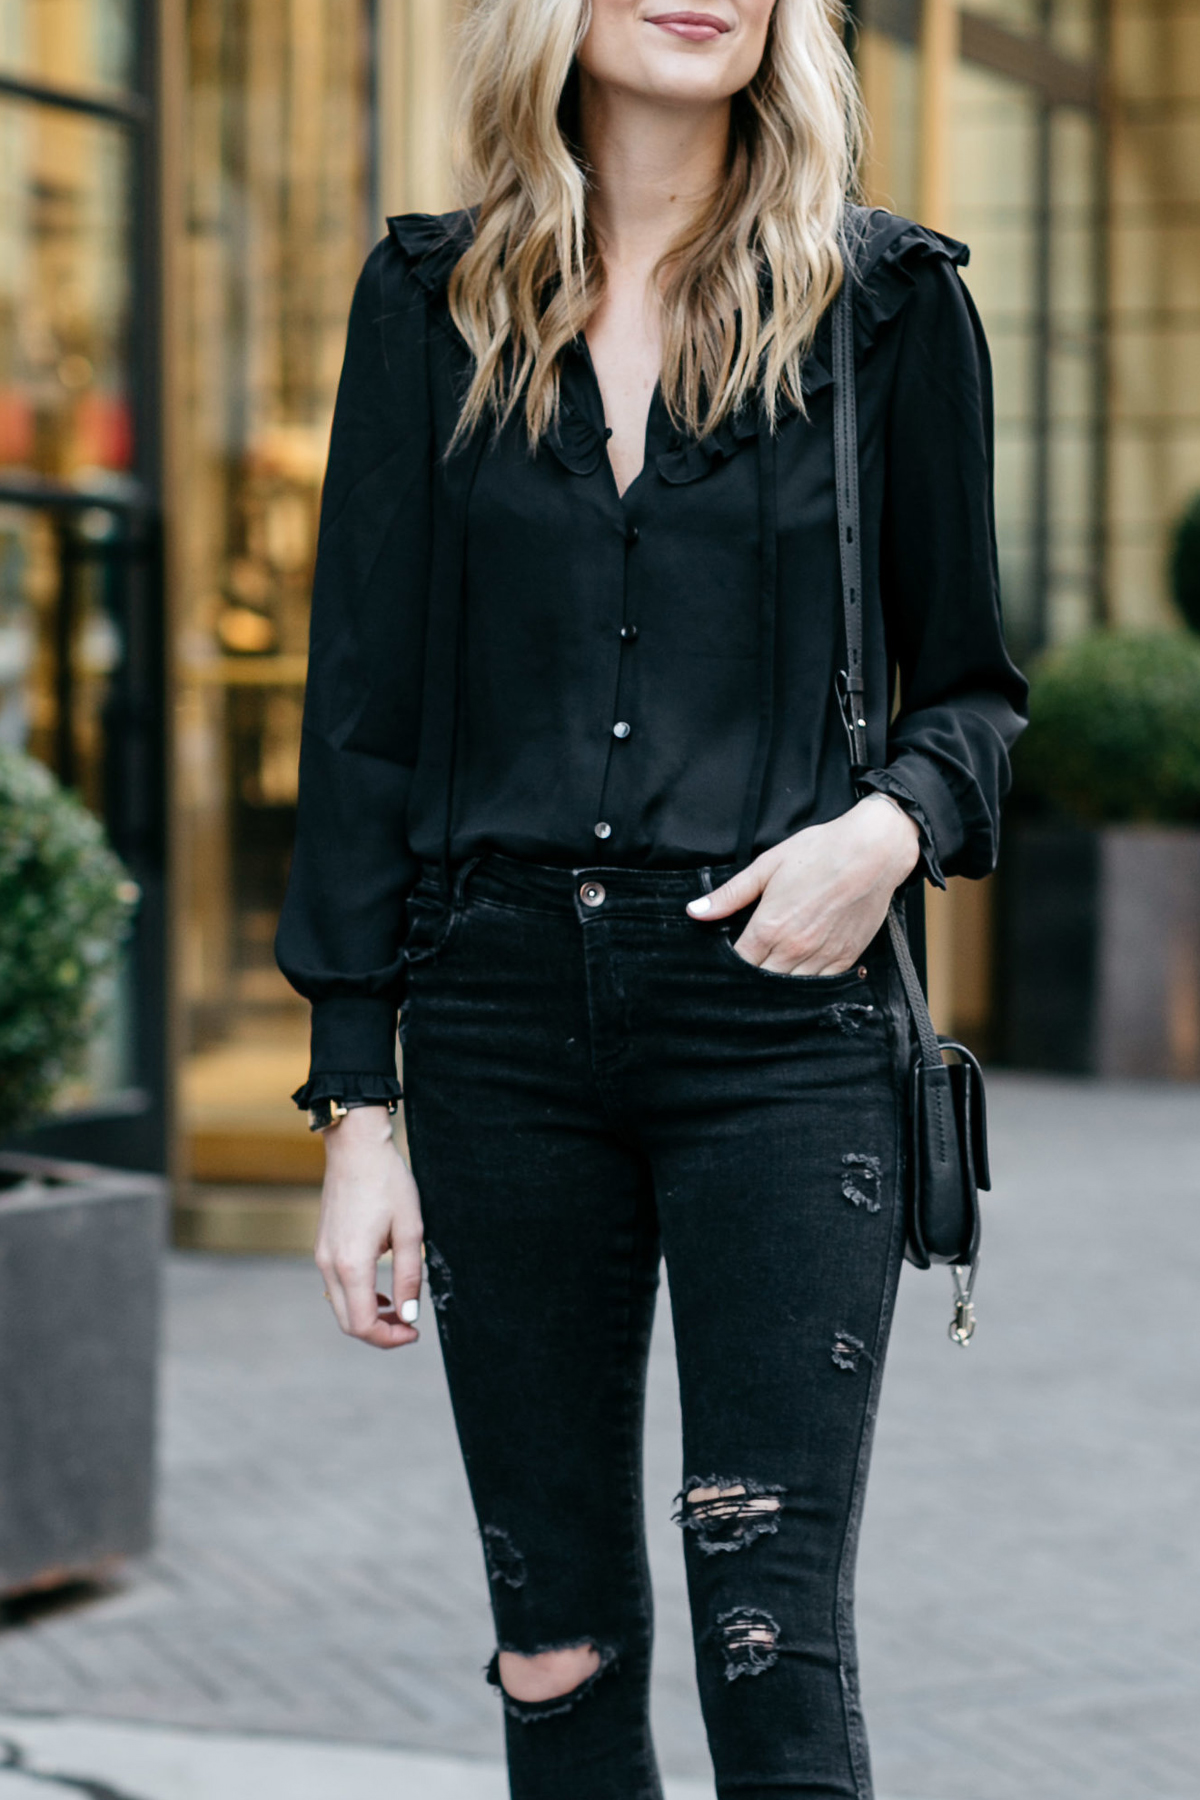 Fall Outfit, Winter Outfit, Black Ruffle Long Sleeve Blouse, Black Ripped Skinny Jeans